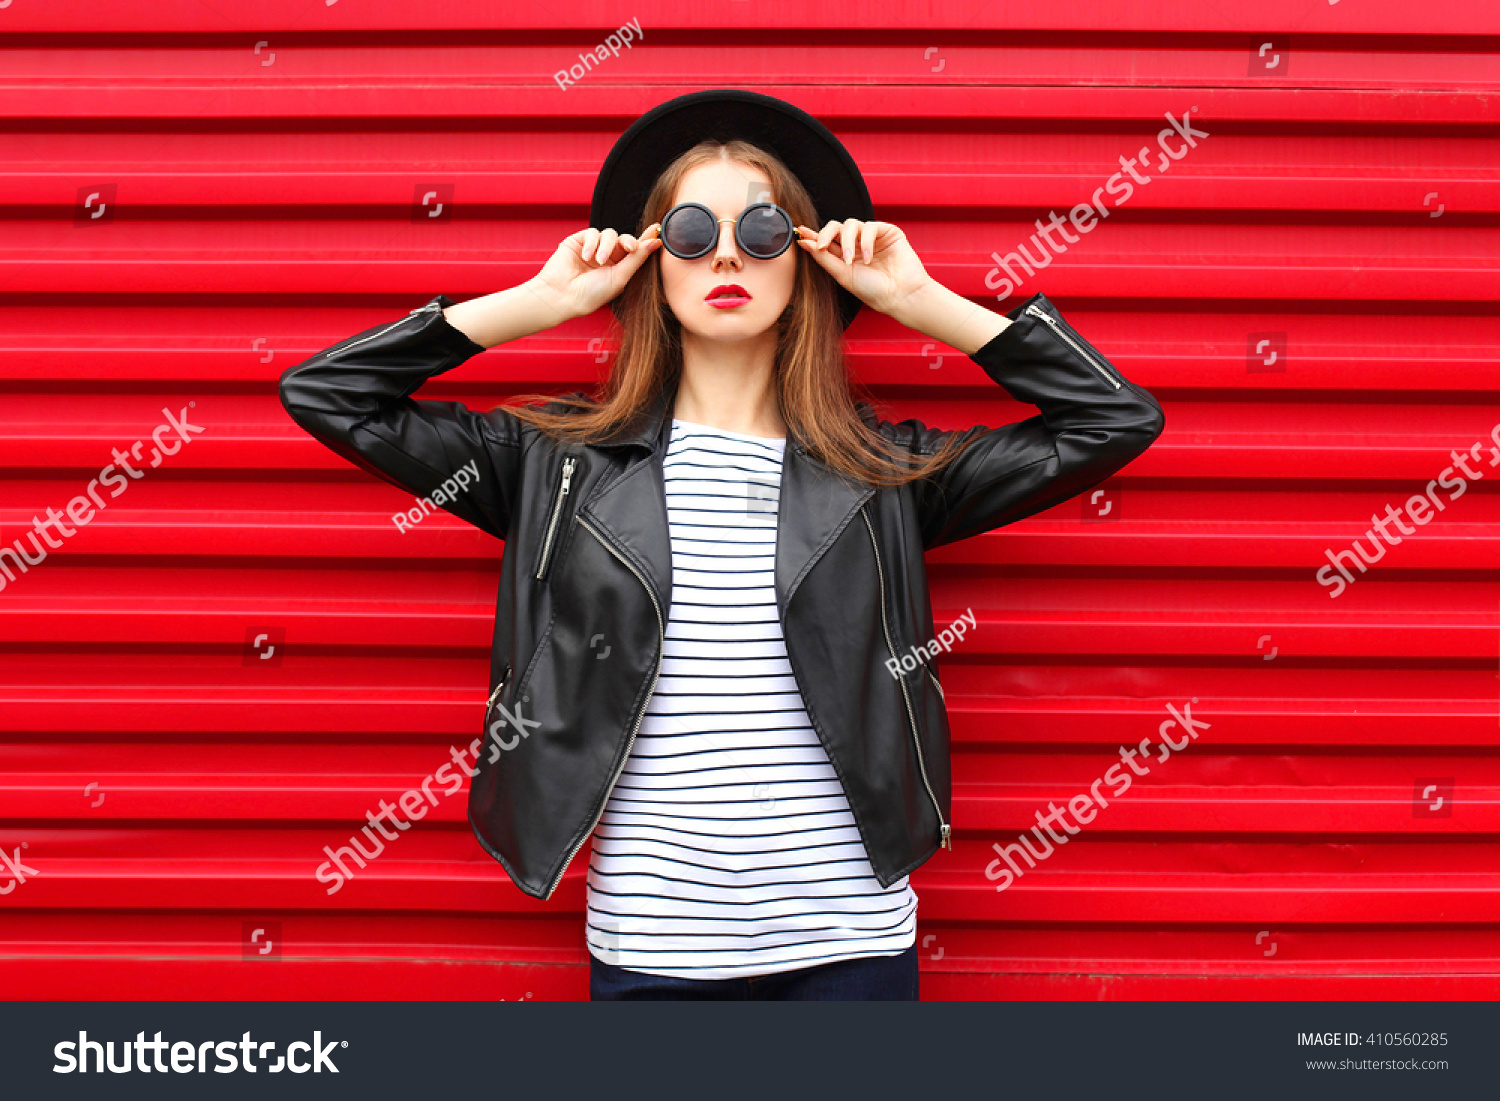 Fashion portrait woman in black rock style on red background #410560285